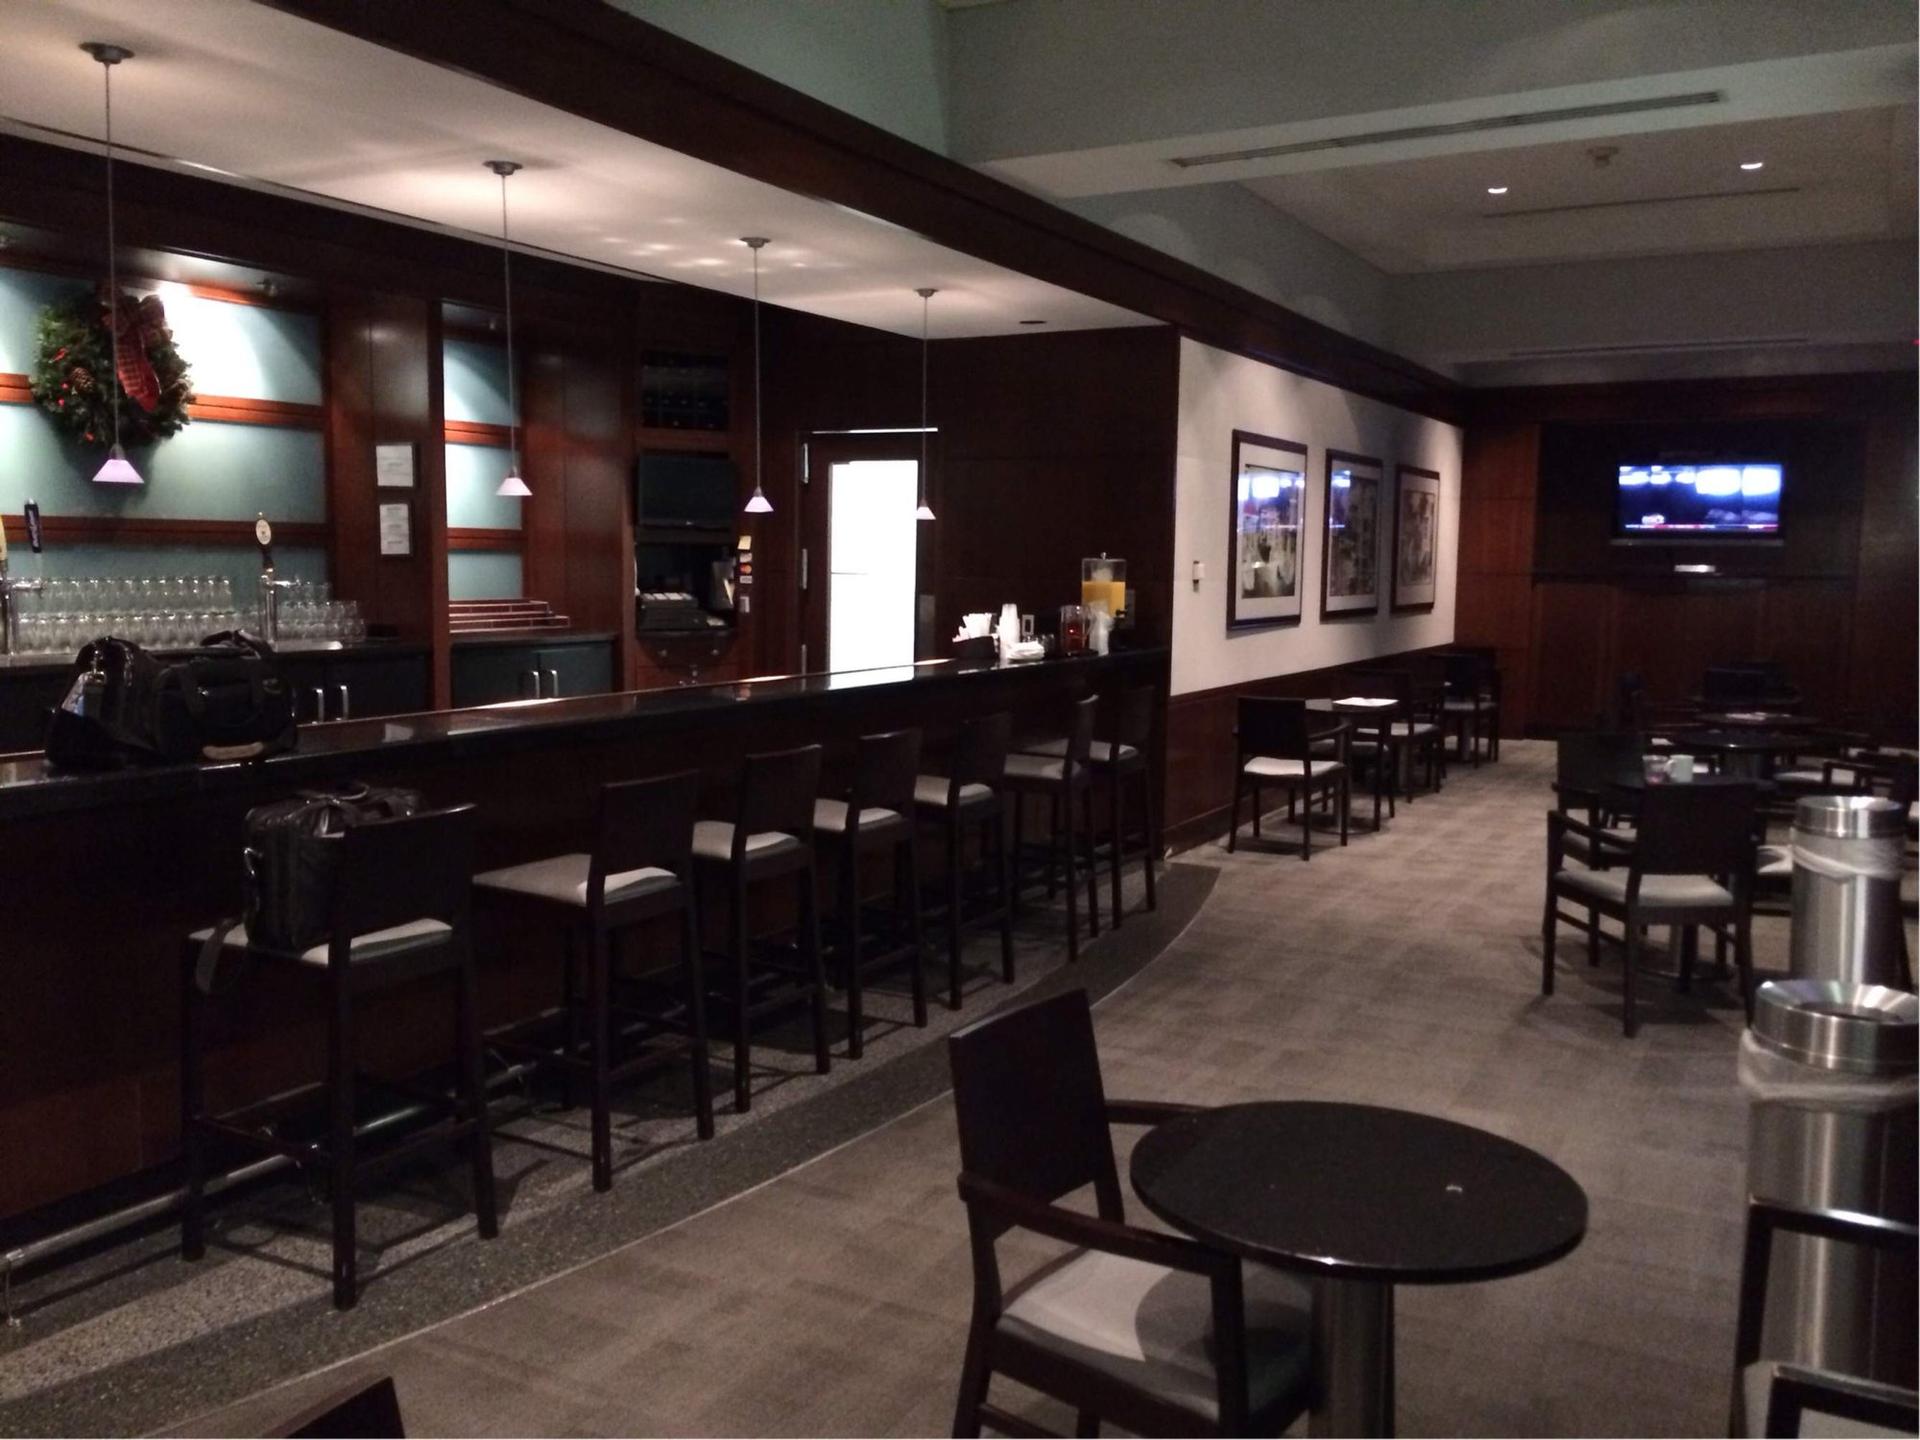 American Airlines Admirals Club image 6 of 37